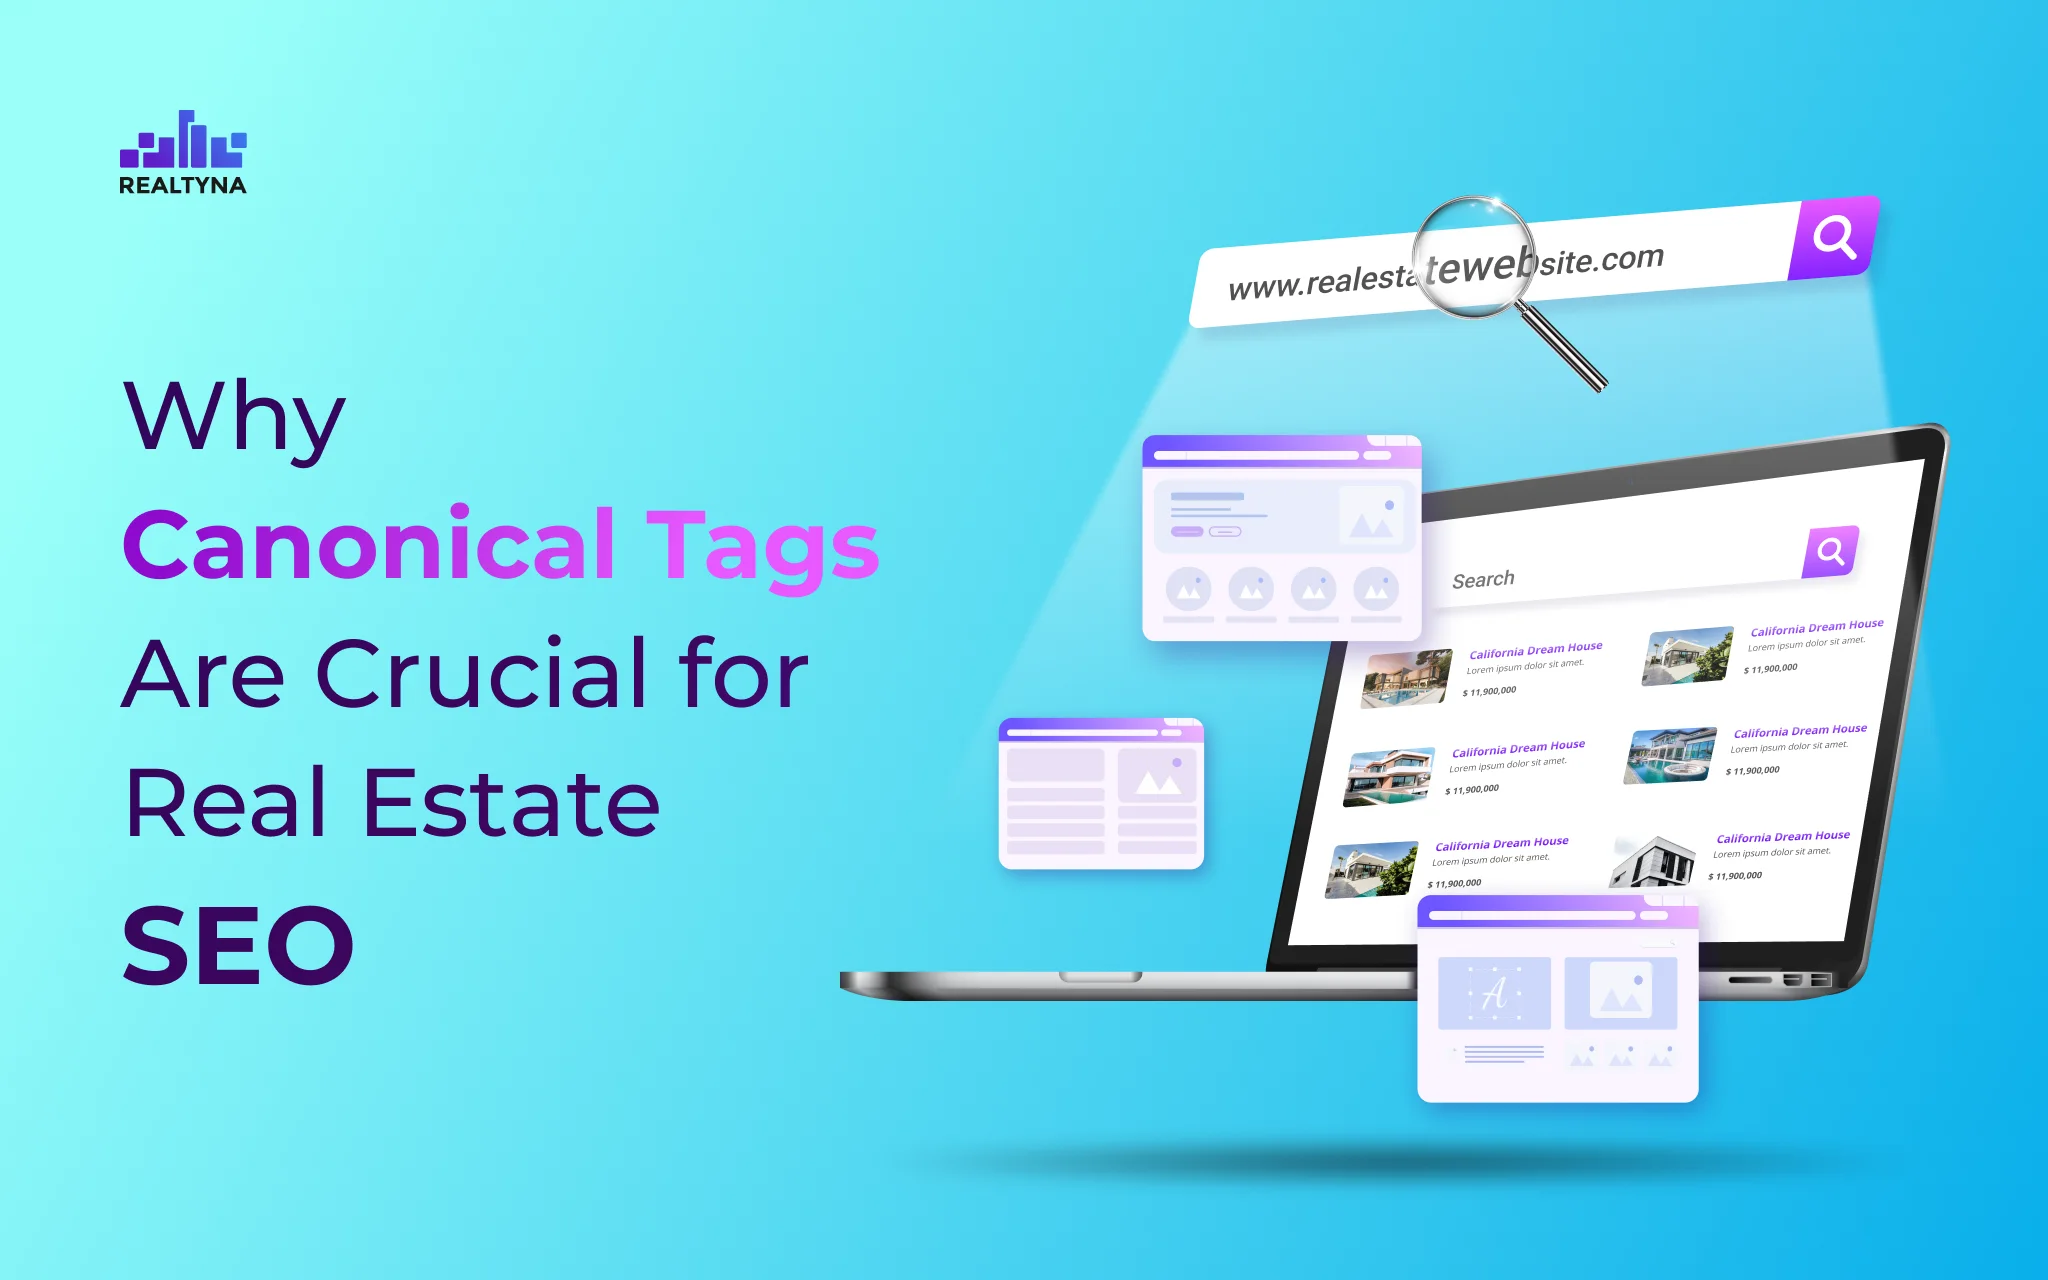 Why Canonical Tags Are Crucial for Real Estate SEO